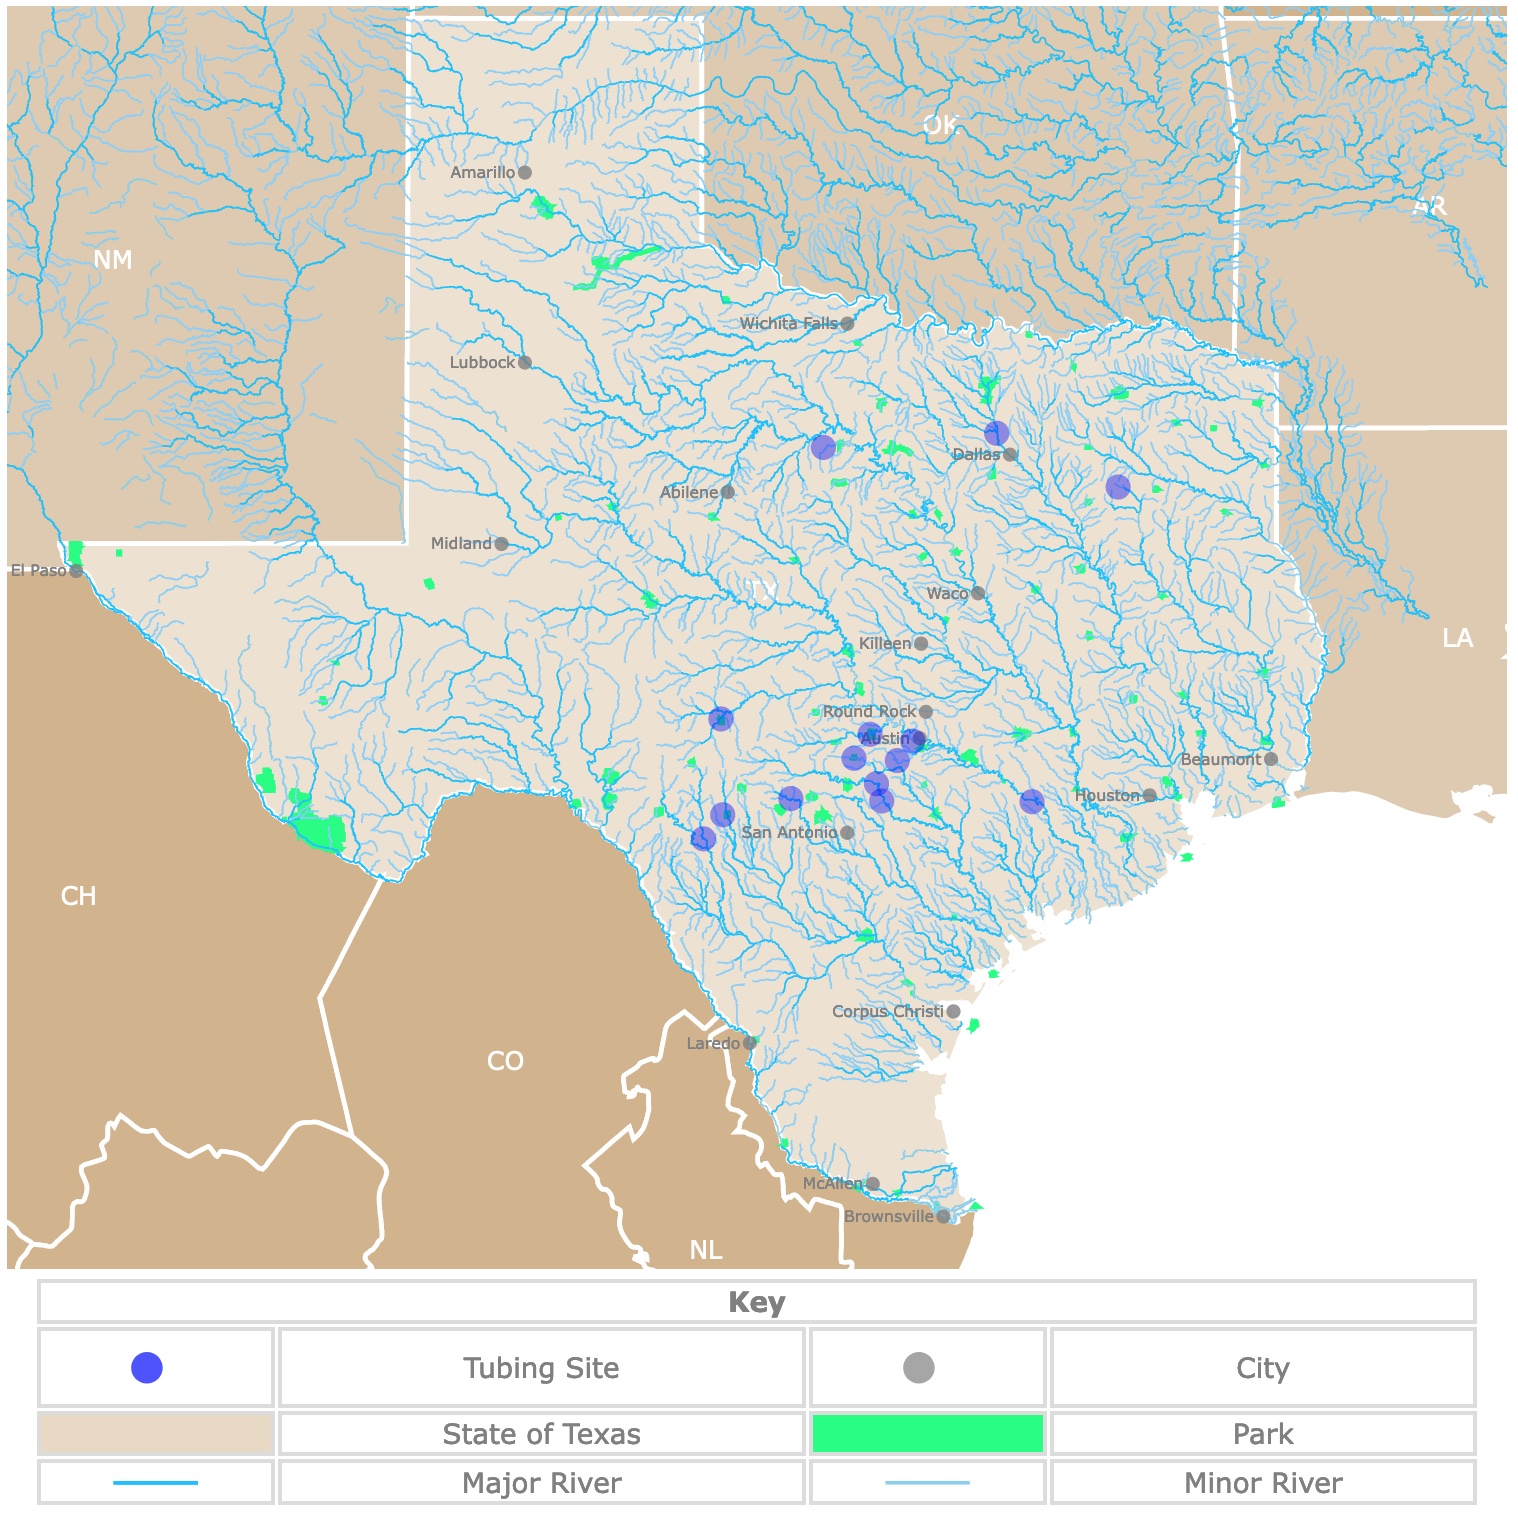 Interactive map of natural Lazy rivers for tubing in Texas.